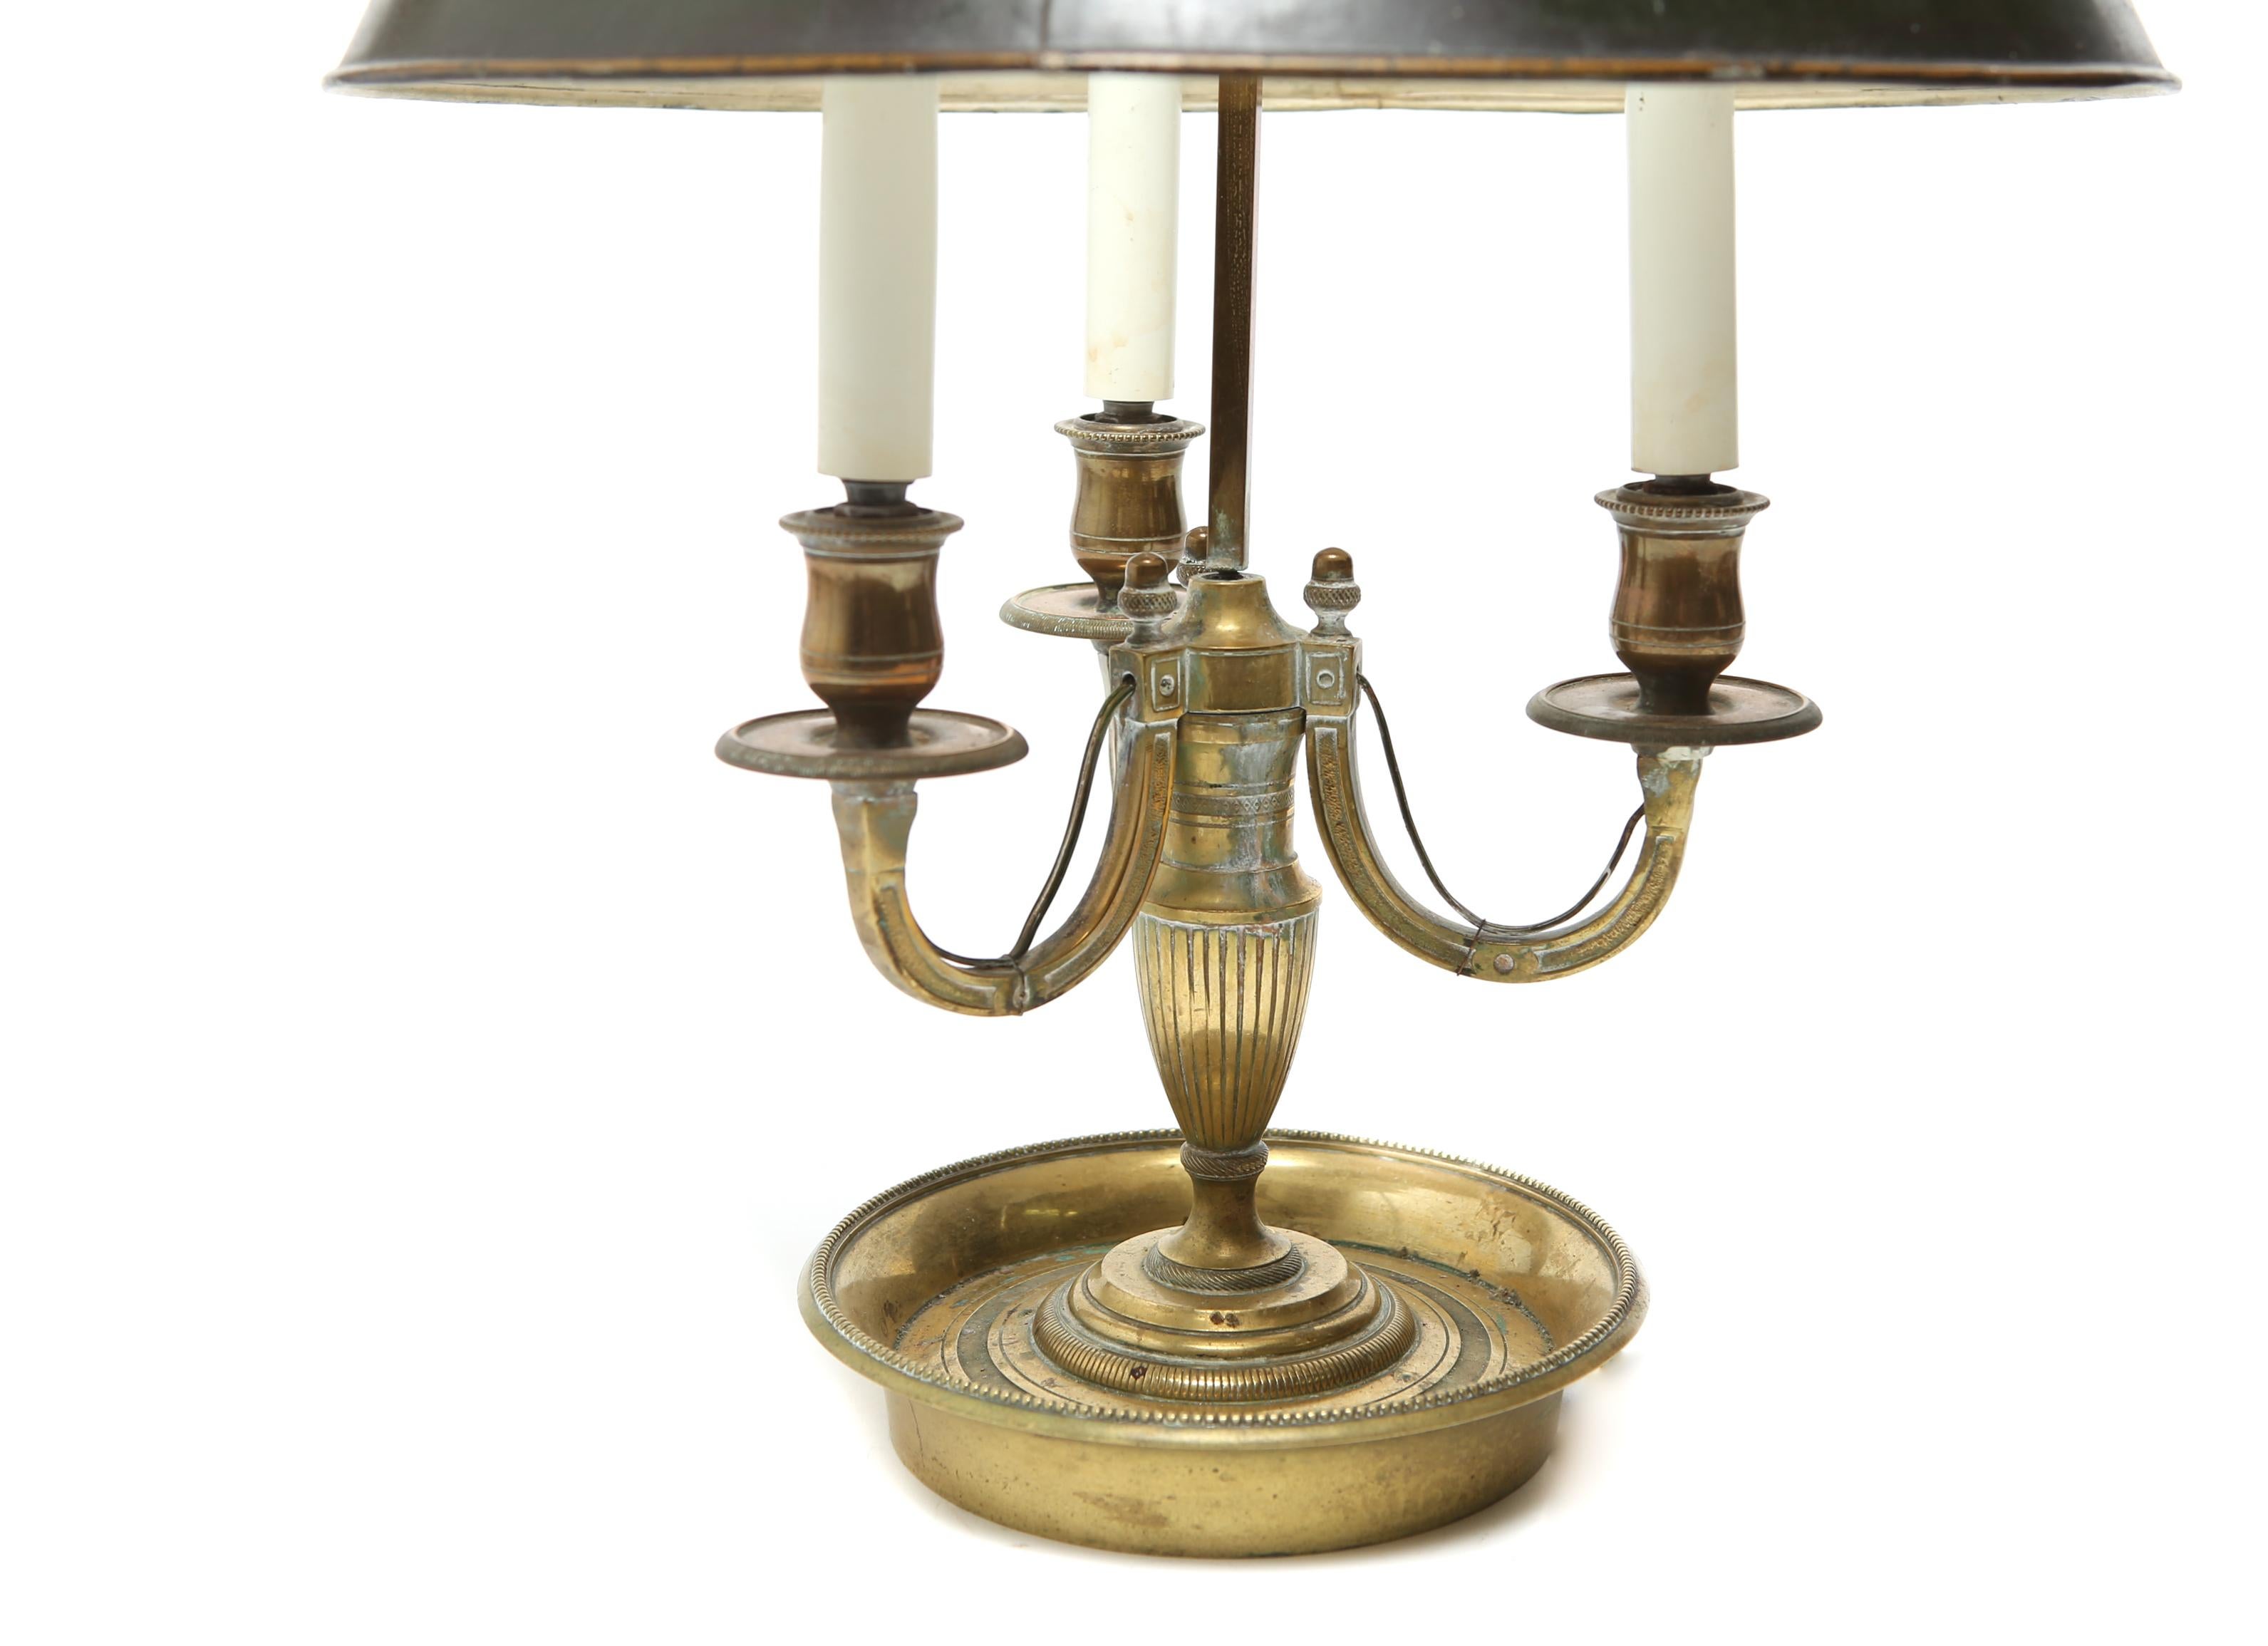 Neoclassical style bouillotte lamp with a three-light gilt bronze reeded urn-form base and with U-form candelabra supports. The piece has a laurel wreath finial and comes with a black toleware shade. In great vintage condition with age-appropriate